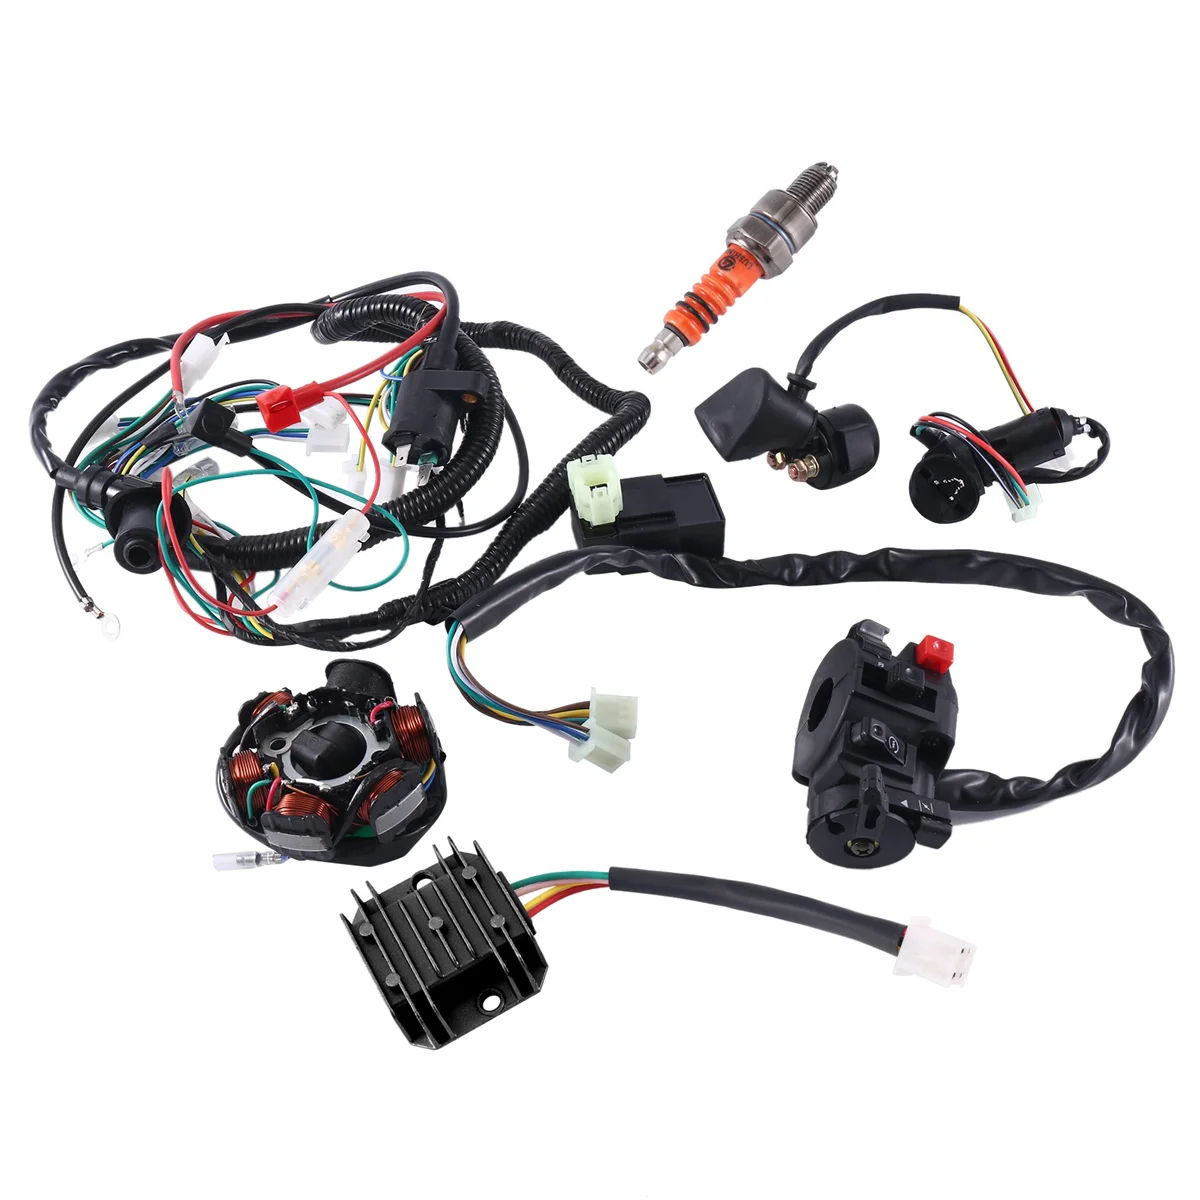 

ATV Wiring Harness Kit, with CDI Stator Regulator Ignition Switch Solenoid Relay for GY6 125Cc 150Cc ATV 4-Stroke Parts